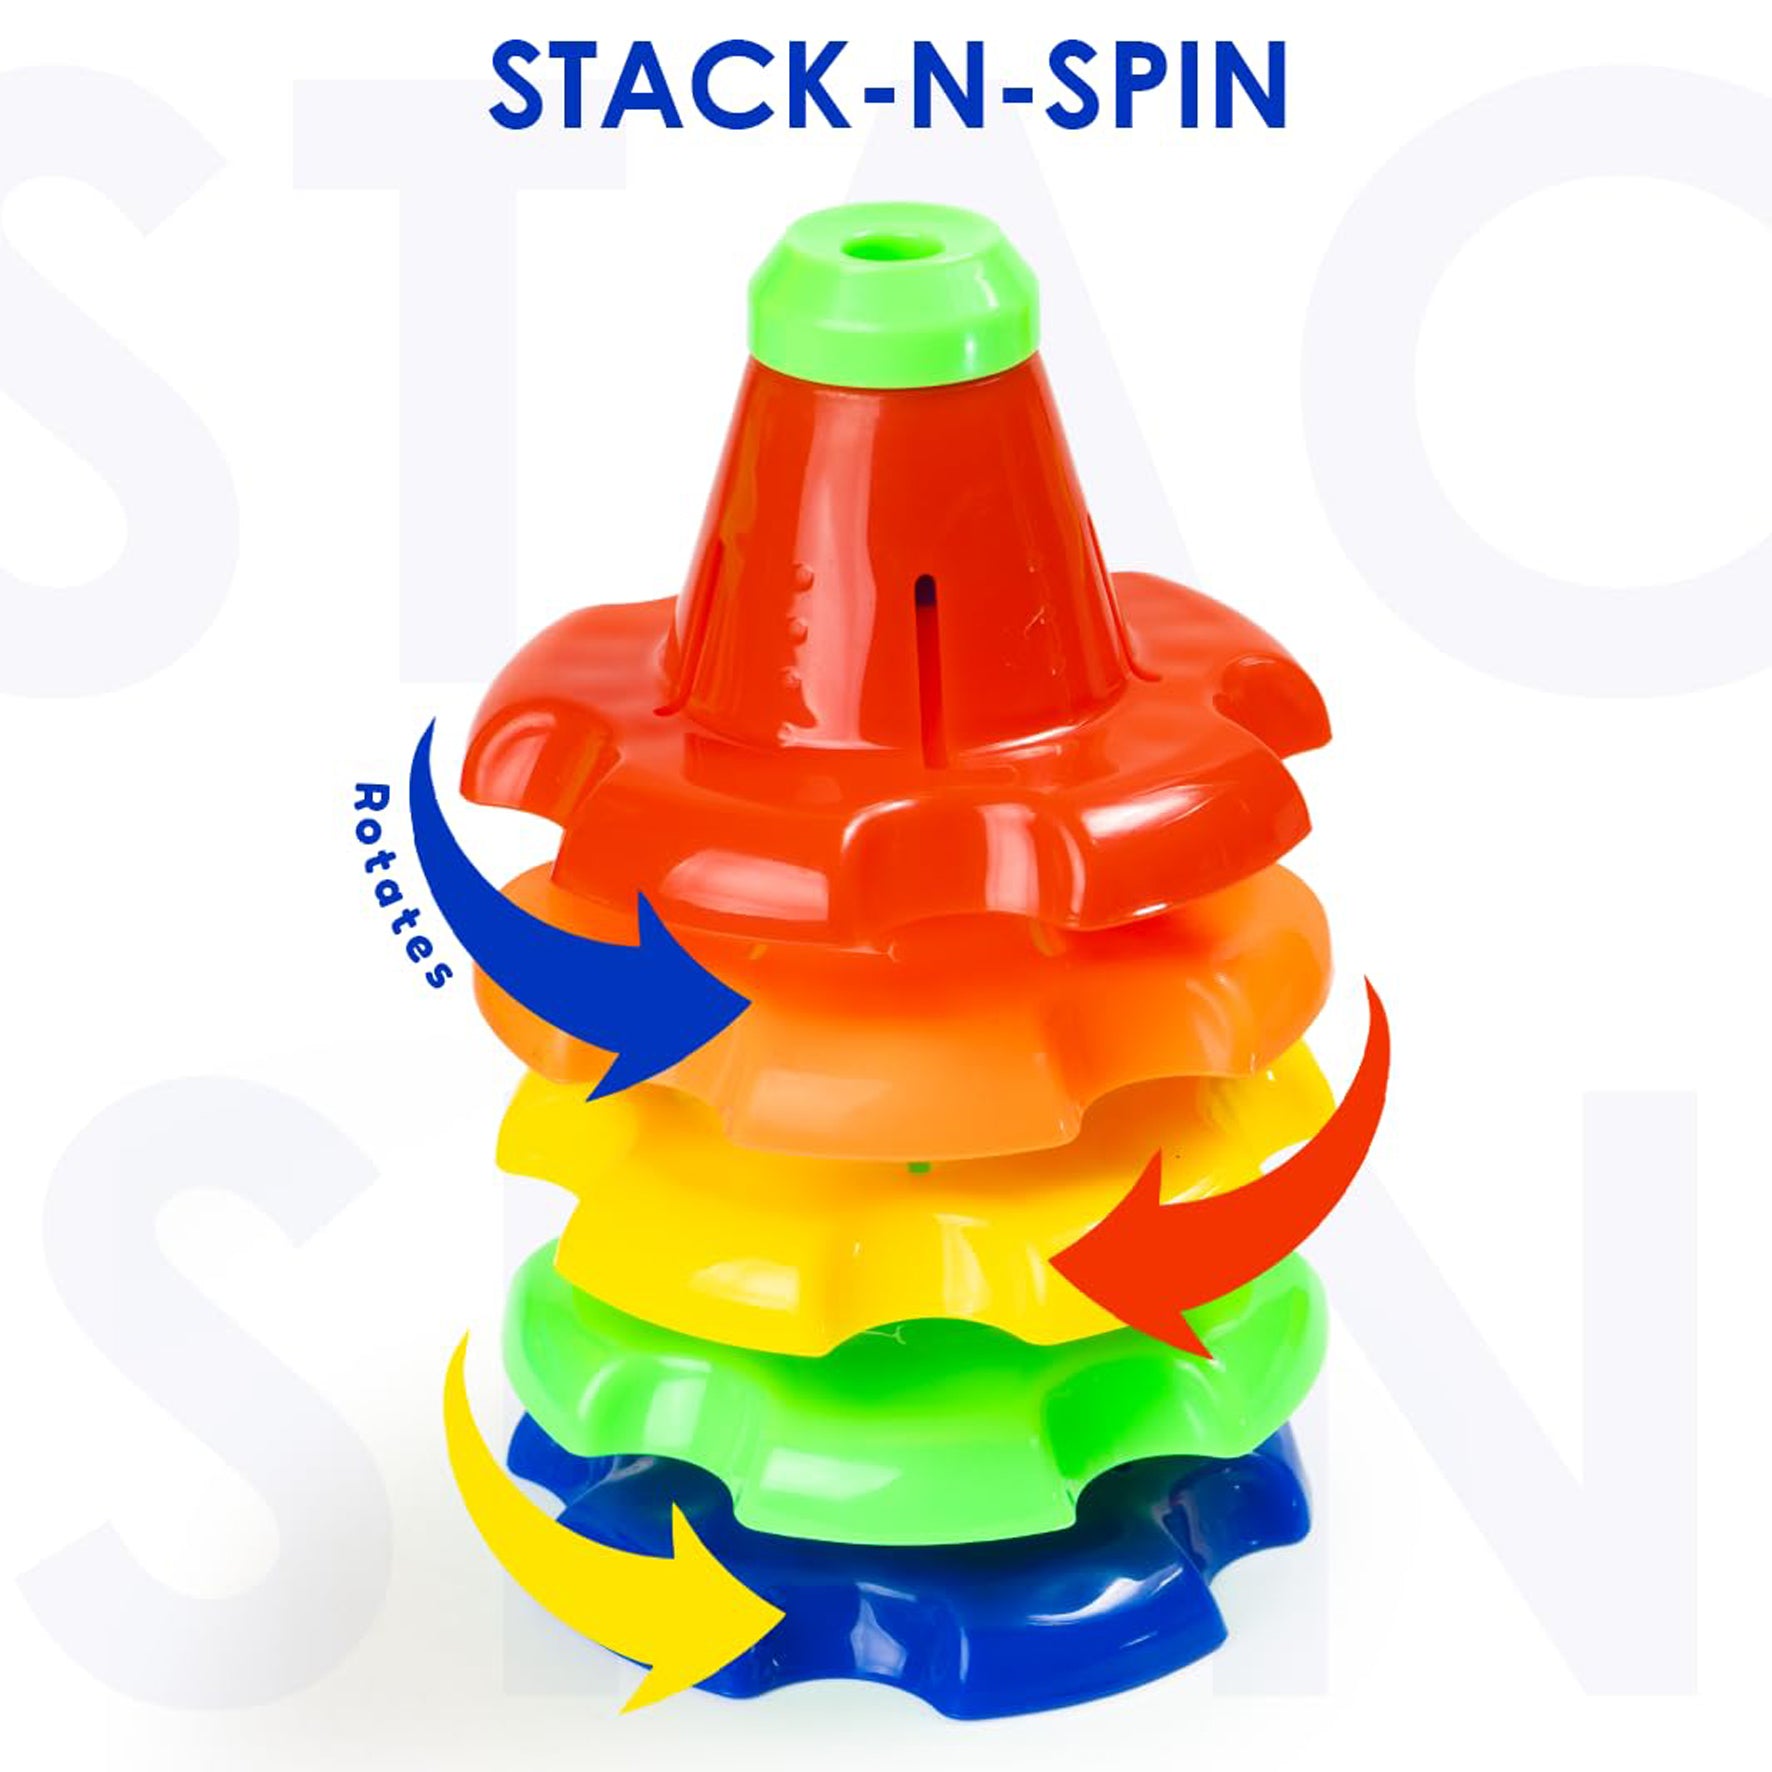 RATNA'S 3 in 1 Kinder Gift Set Containing Stack-N-Spin, Rainbow Spinning Tower & Shape Sorter Cube Montessori Toys Preschool Learning for Infants & Toddlers